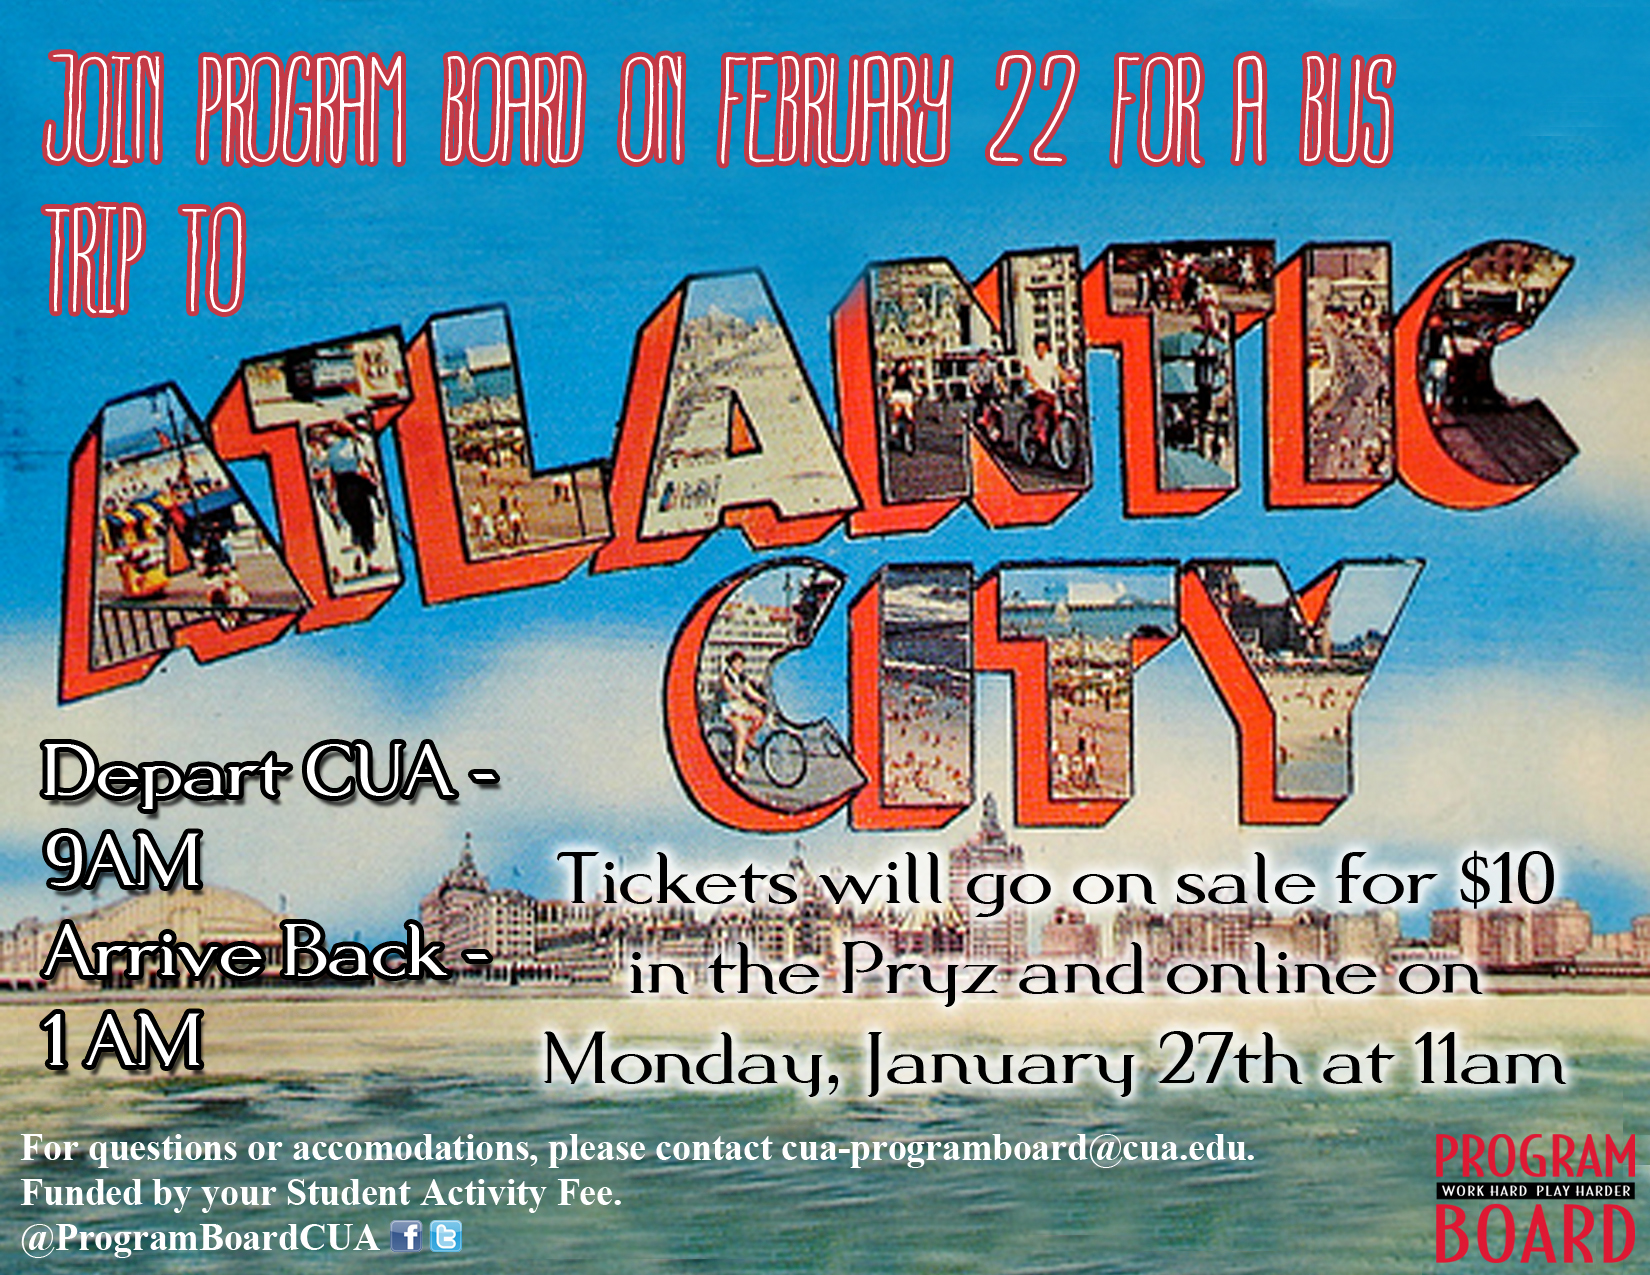 1 day bus trips to atlantic city